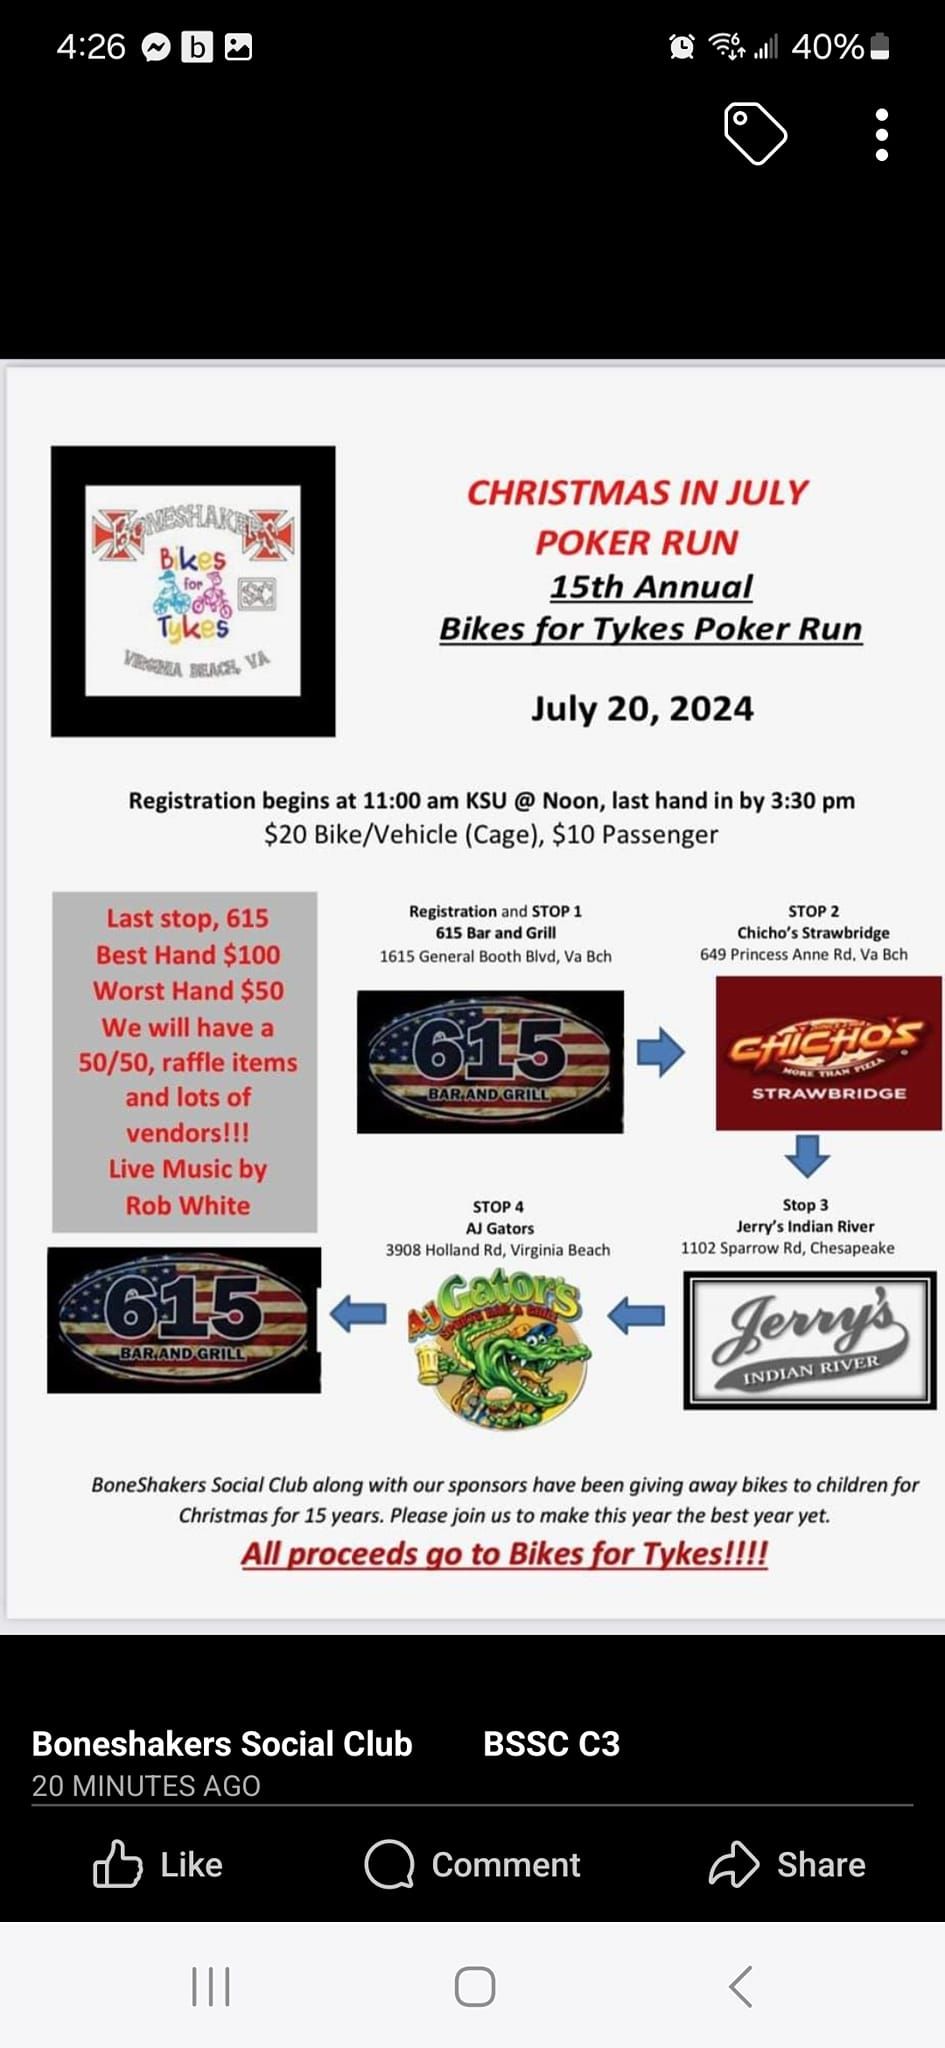 Meet Up for the Christmas in July Poker Run